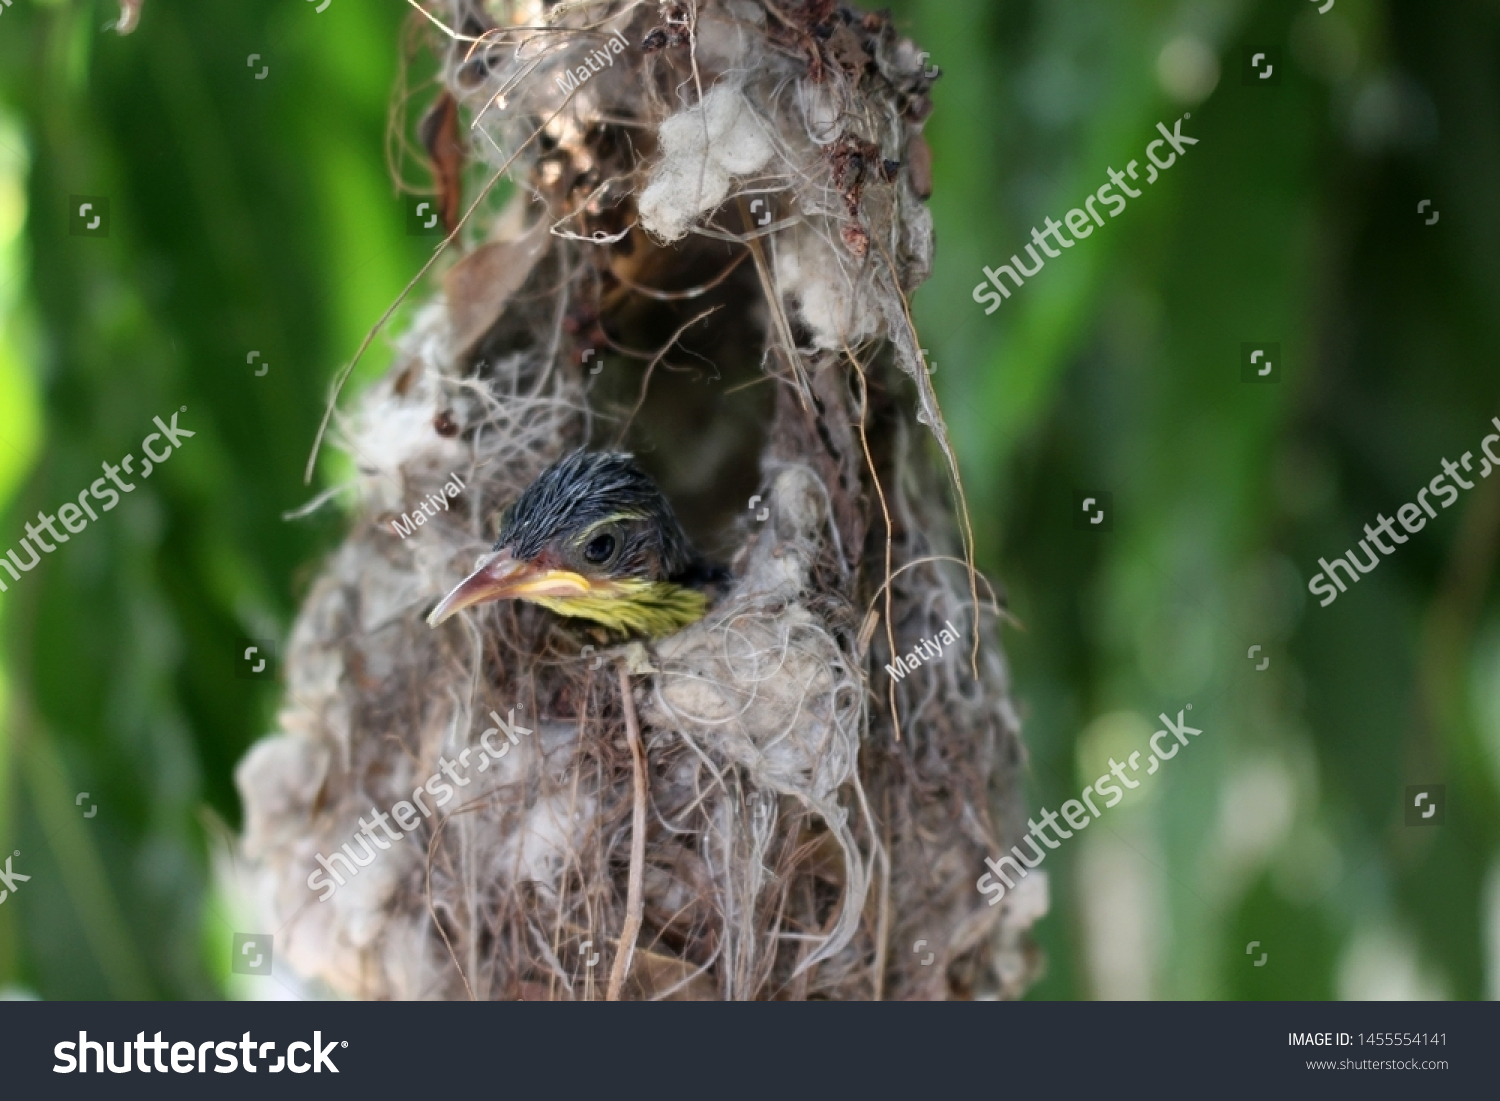 Hummingbird is one of the best beautiful bird , here is a baby bird which came out first time from the nest, it seems quit surprised in open world  #1455554141